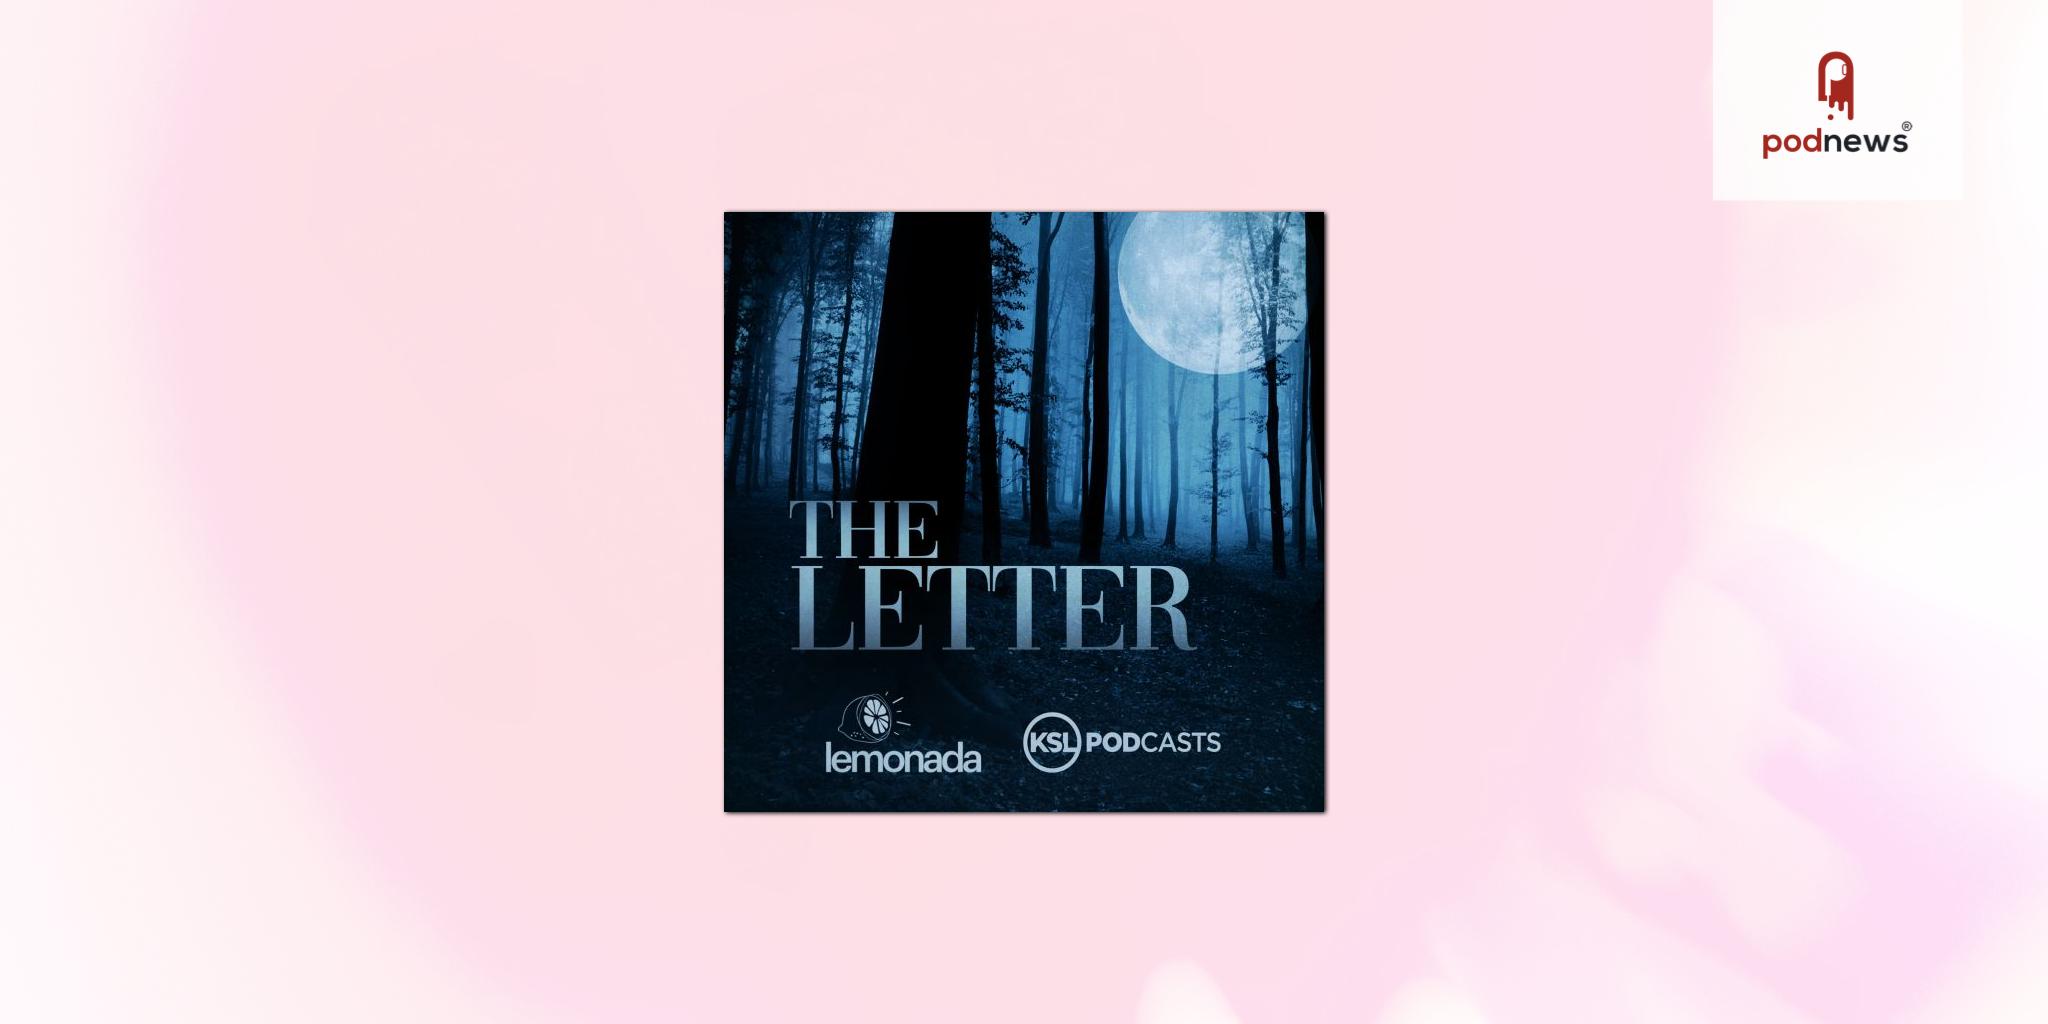 “The Letter” – A True Crime Podcast Which Details Healing After Tragedy